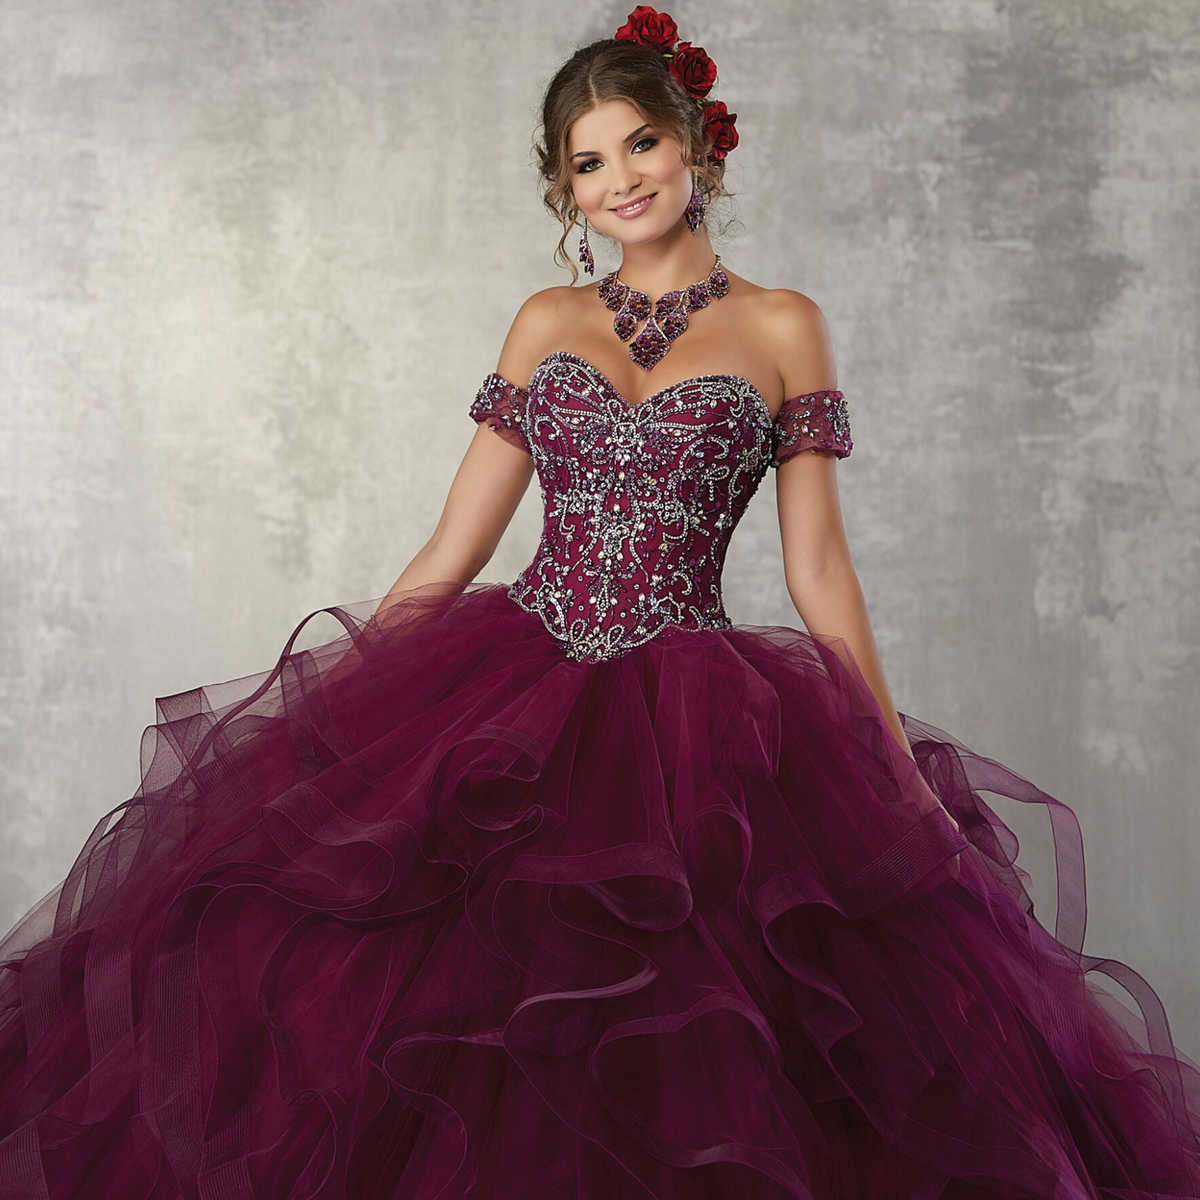 Quinceanera dress for that special day with friends and family.